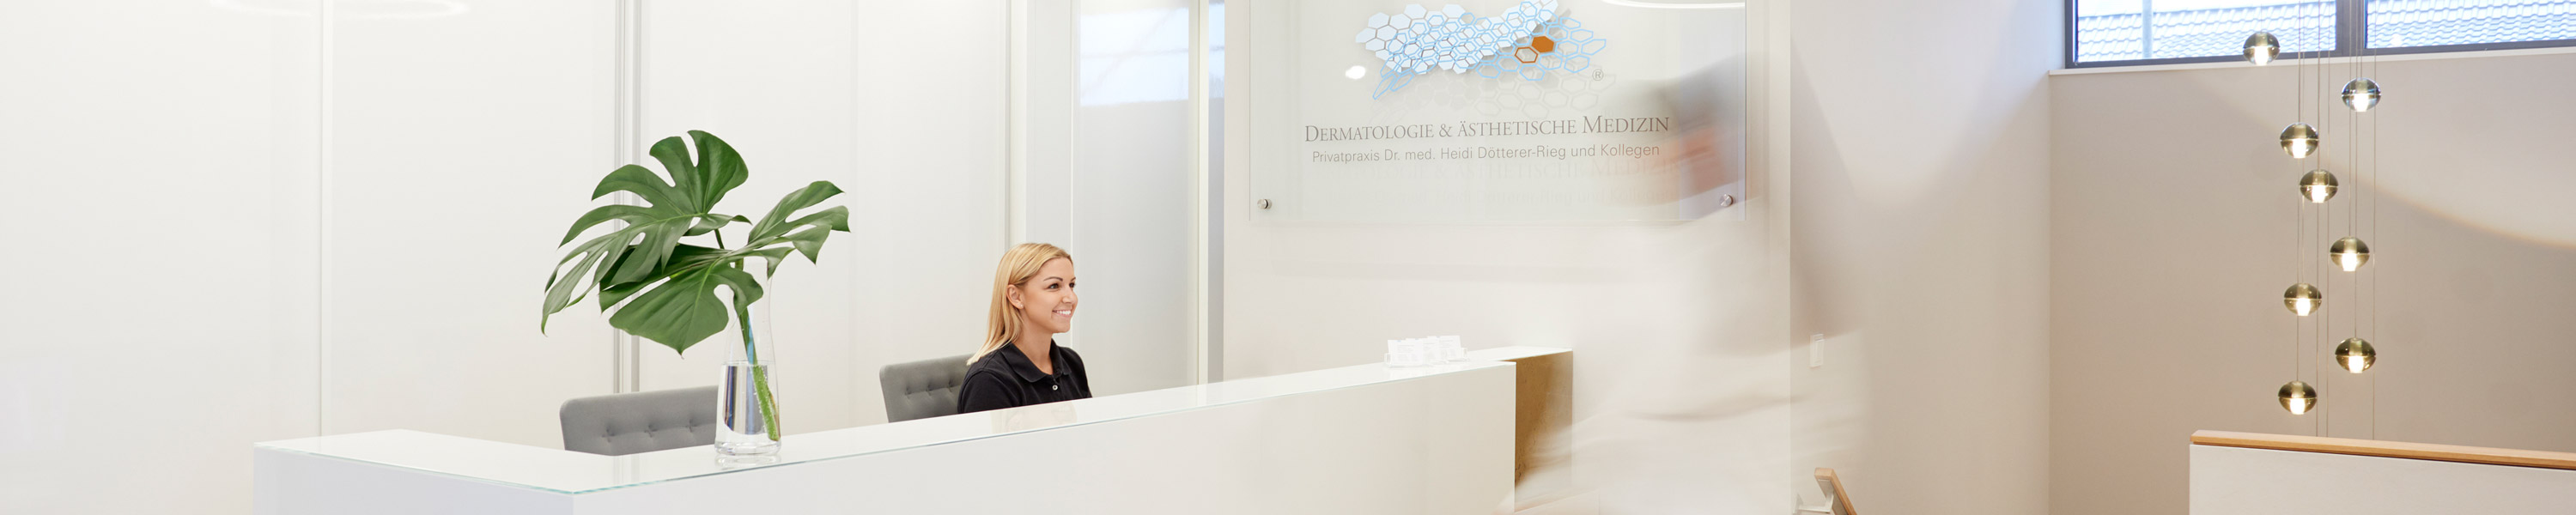 A medical assistant receives a patient at the reception desk in the private dermatology practice. The employee of the private medical practice smiles at the patient. The rooms are bright and modernly furnished.